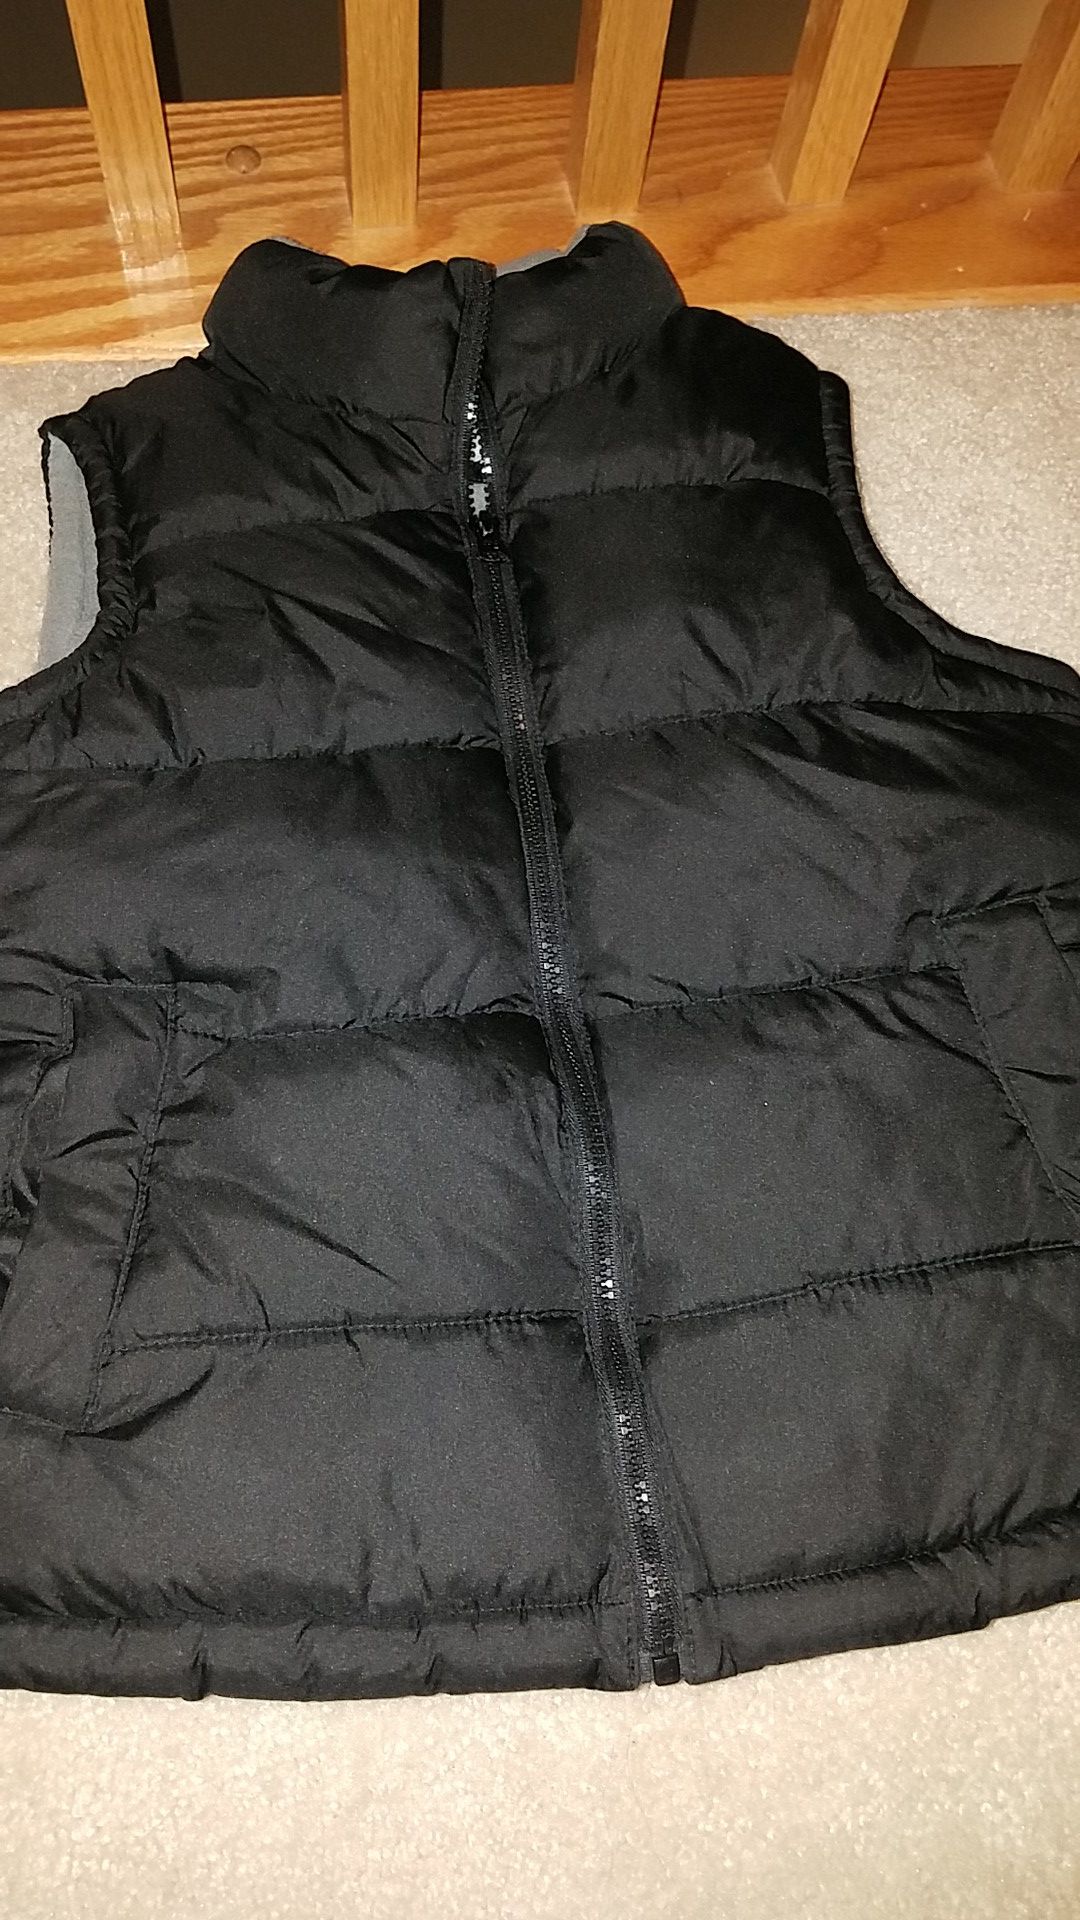 Boys size small puffer vest